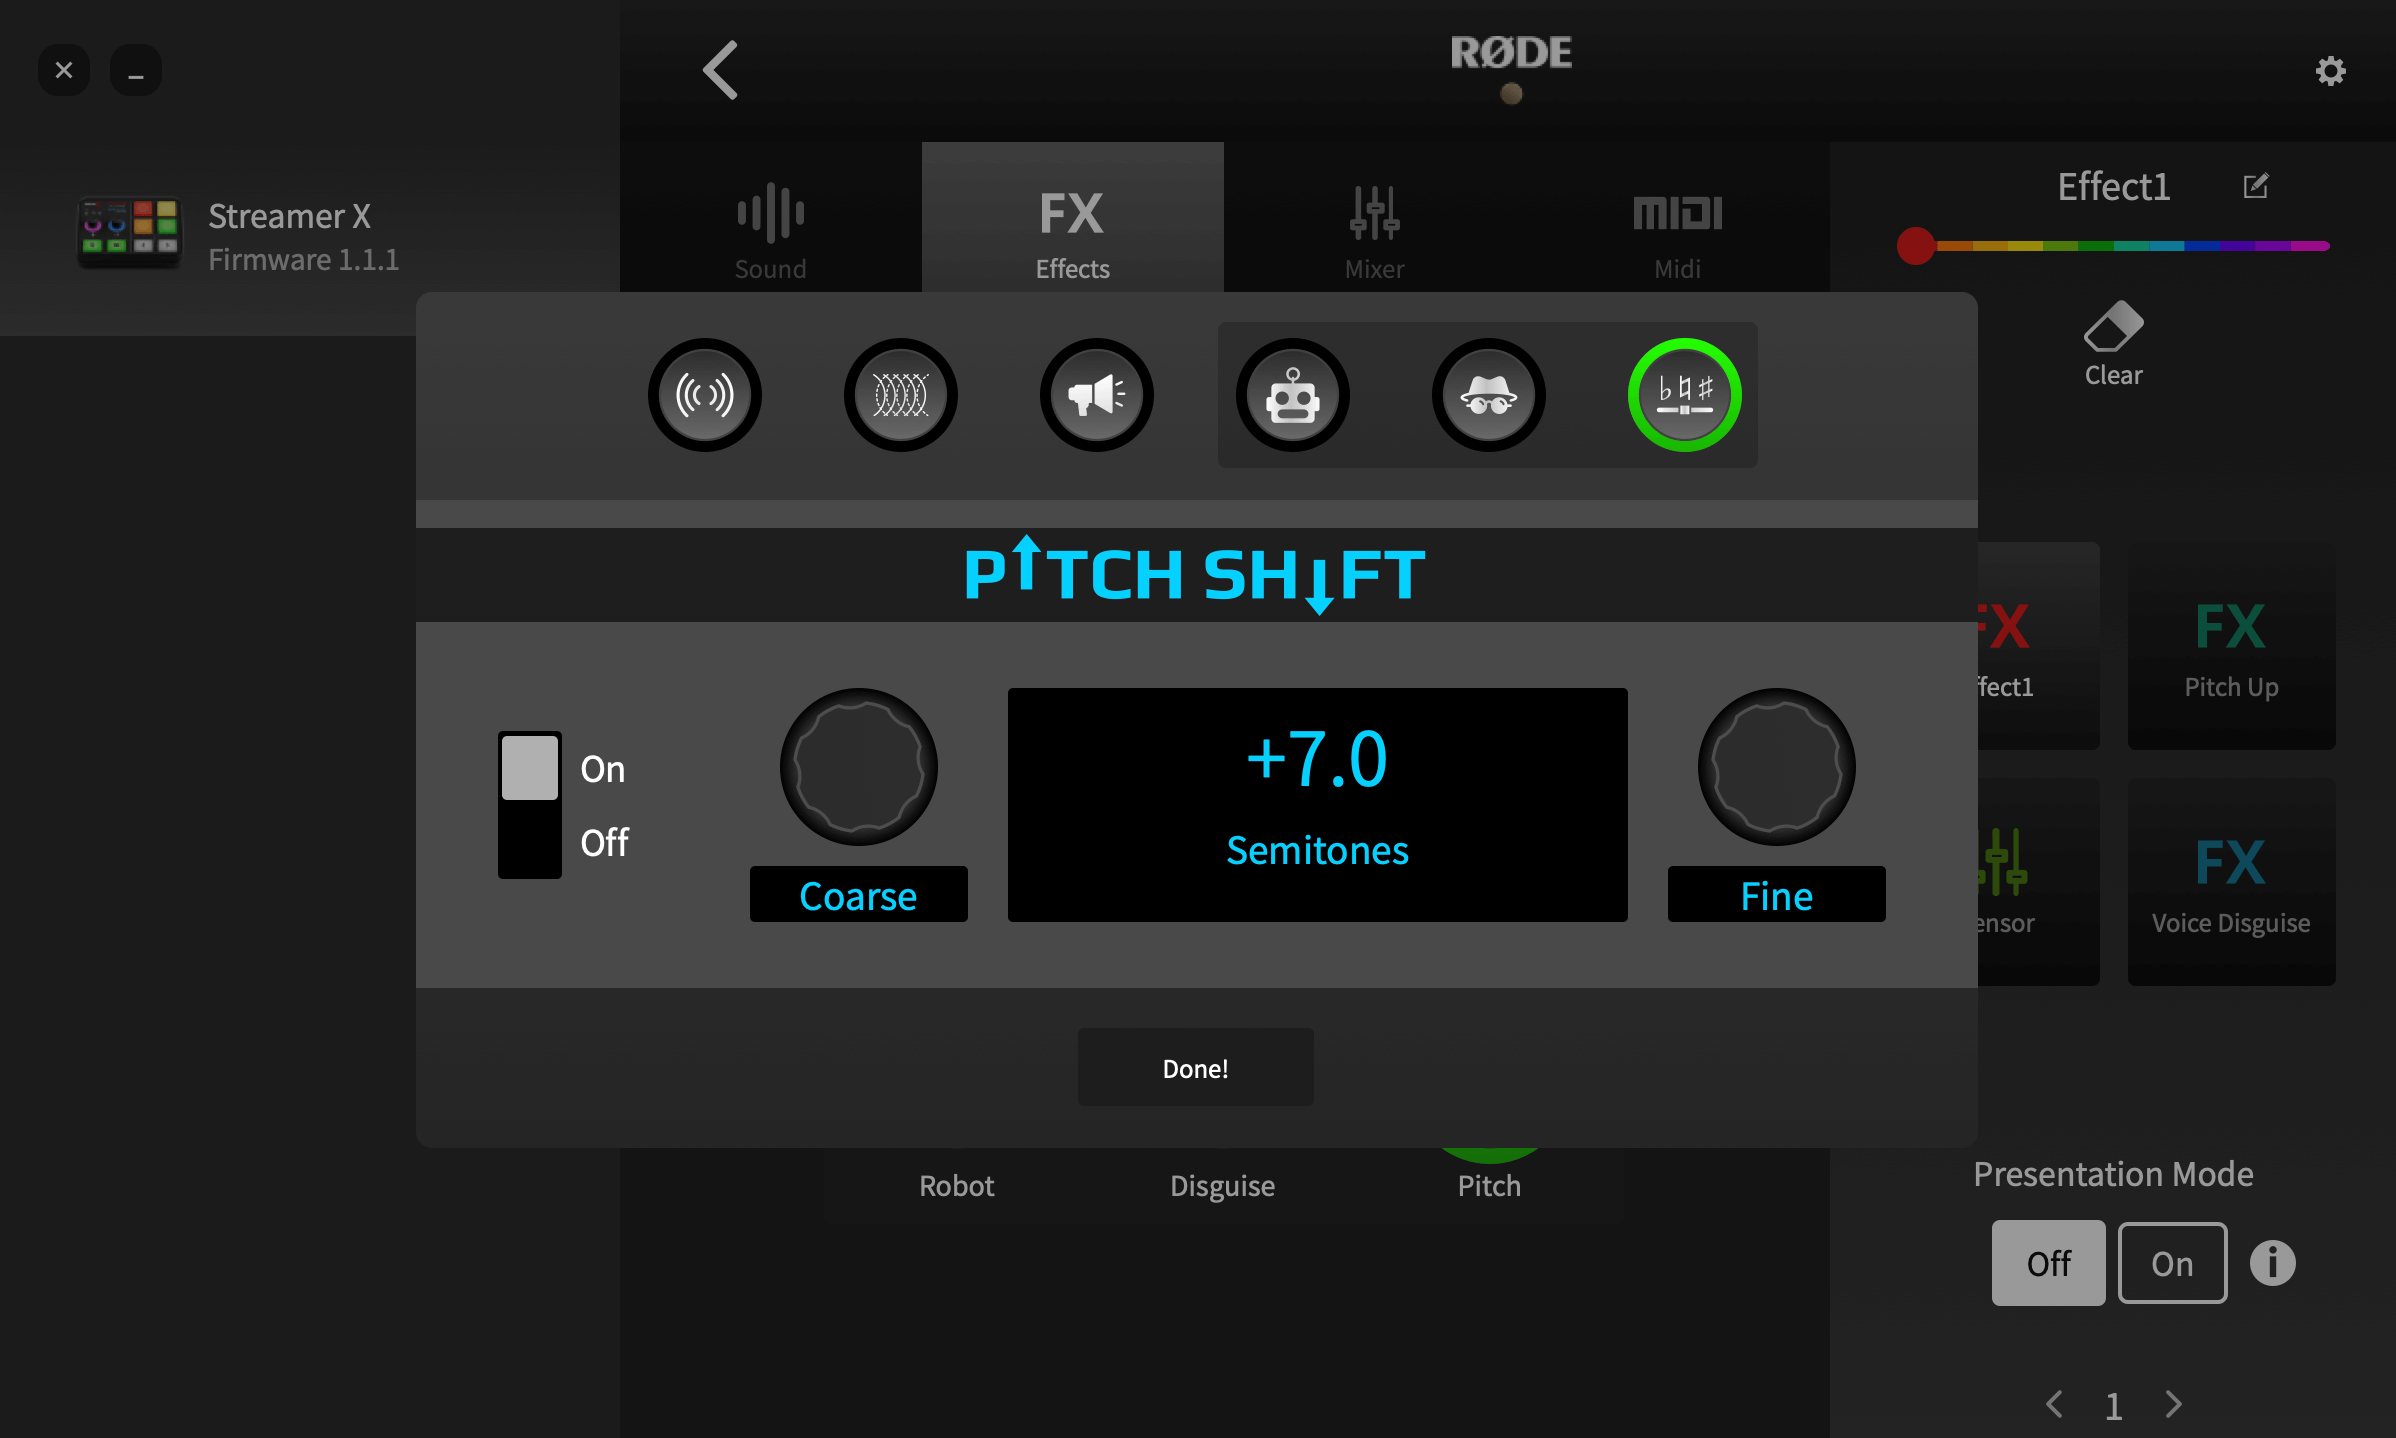 RØDE Central showing Streamer X pitch shift setting